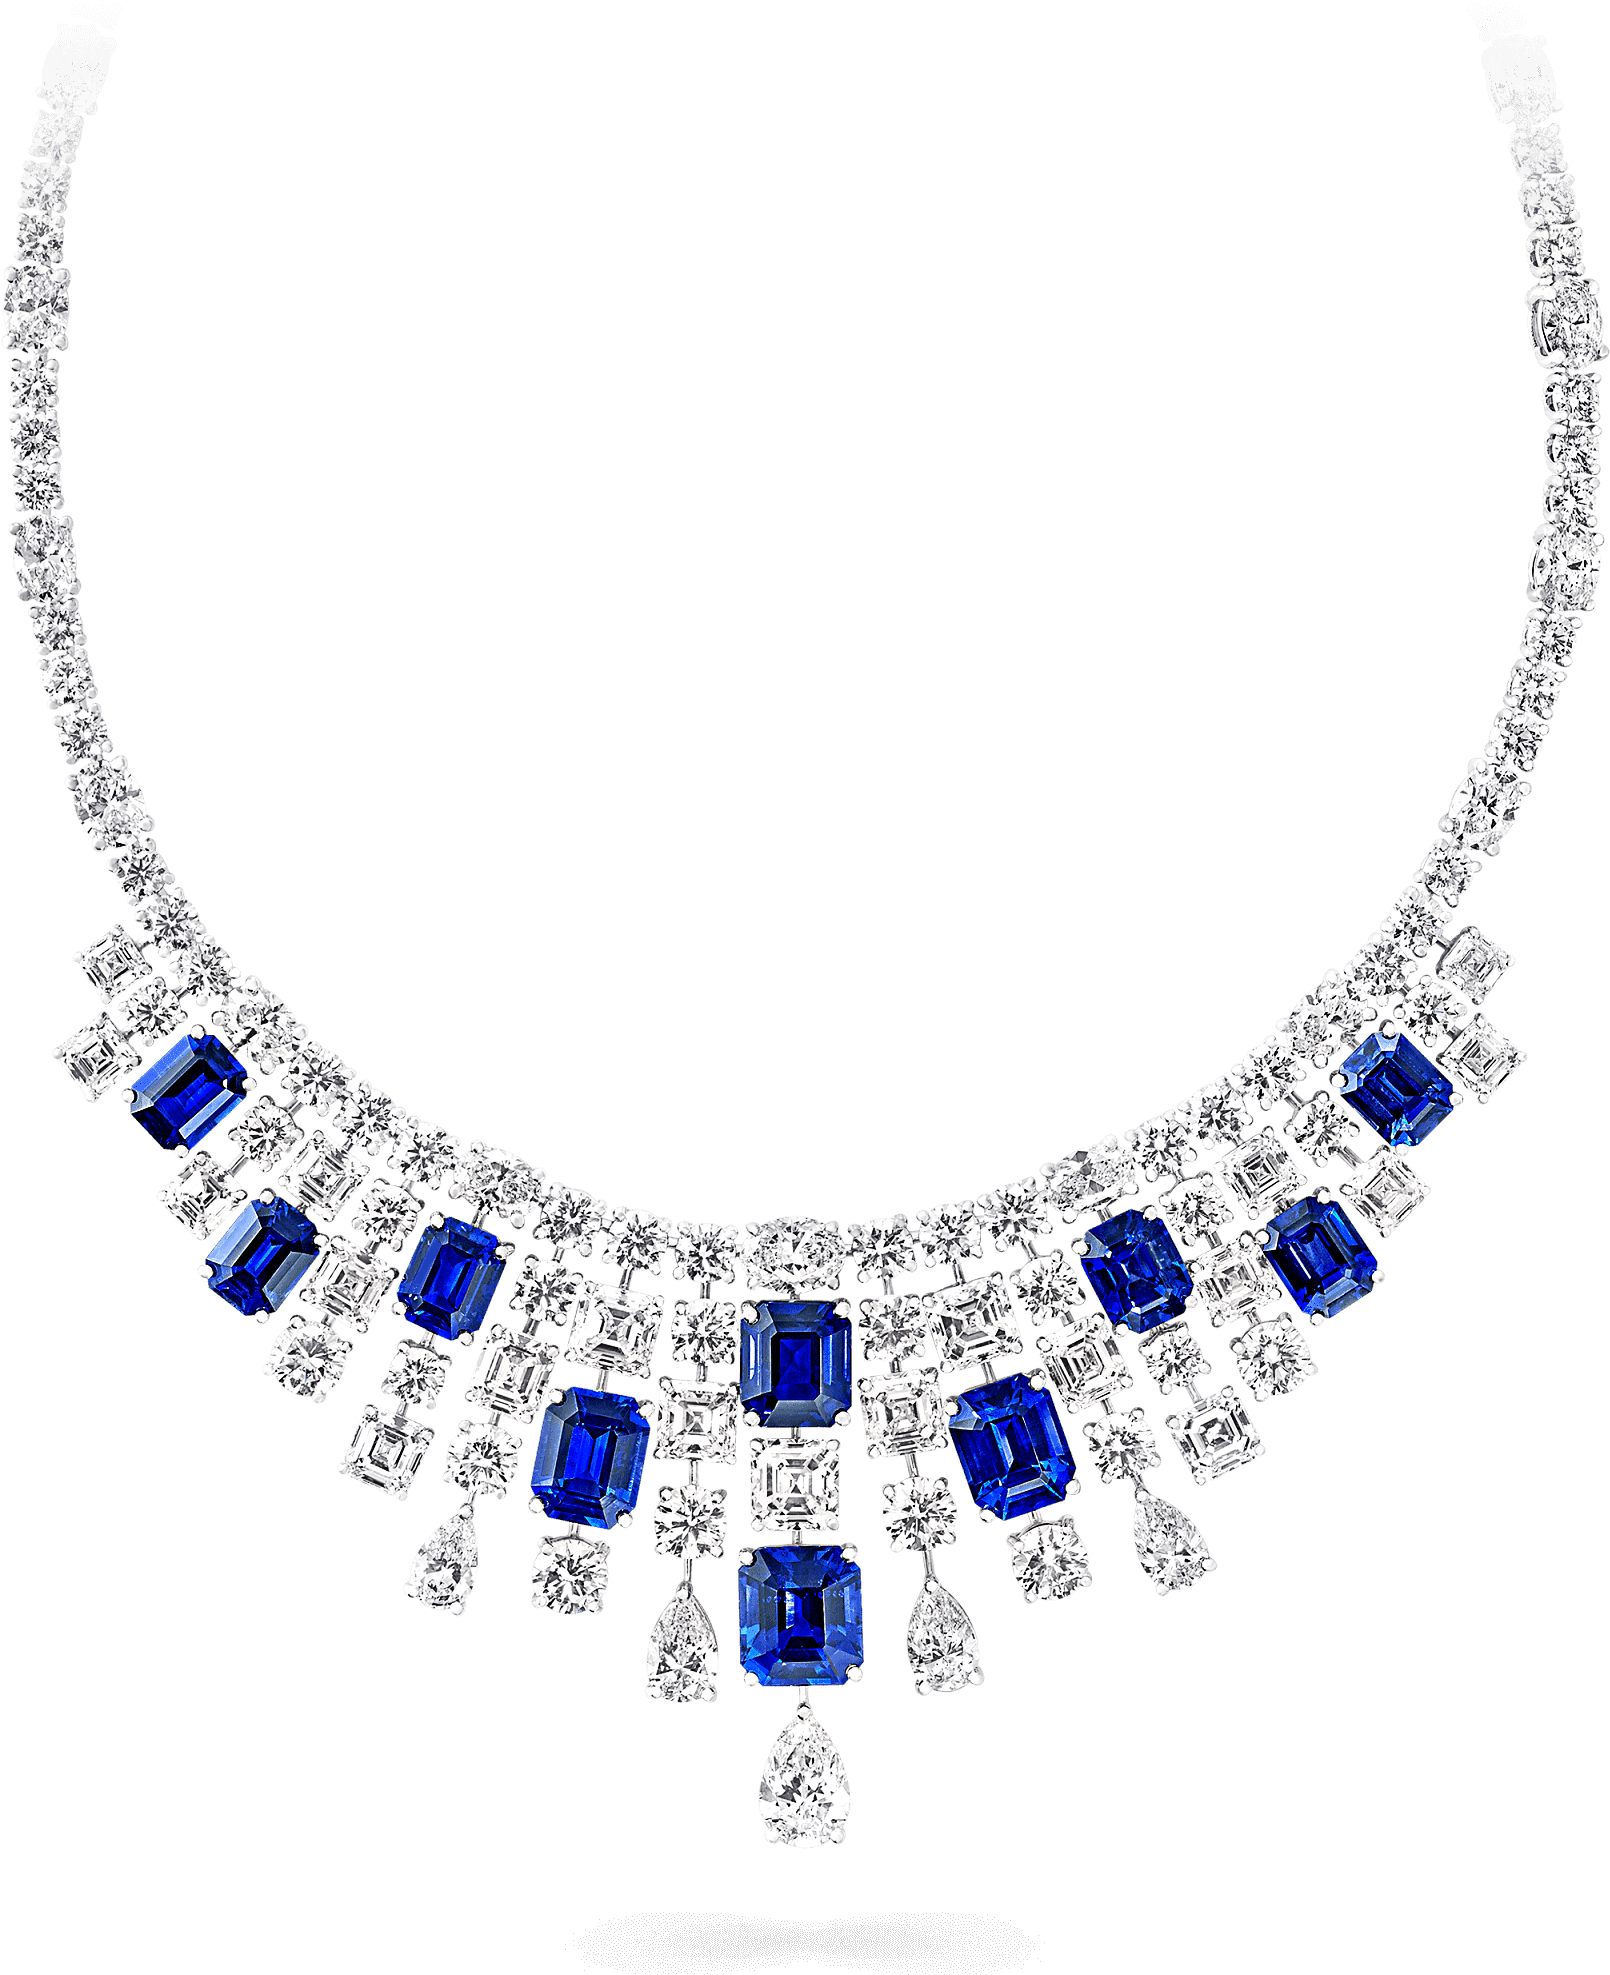 A Graff Sapphire And Diamond Fringe Necklace - Sapphire Necklace Png ...